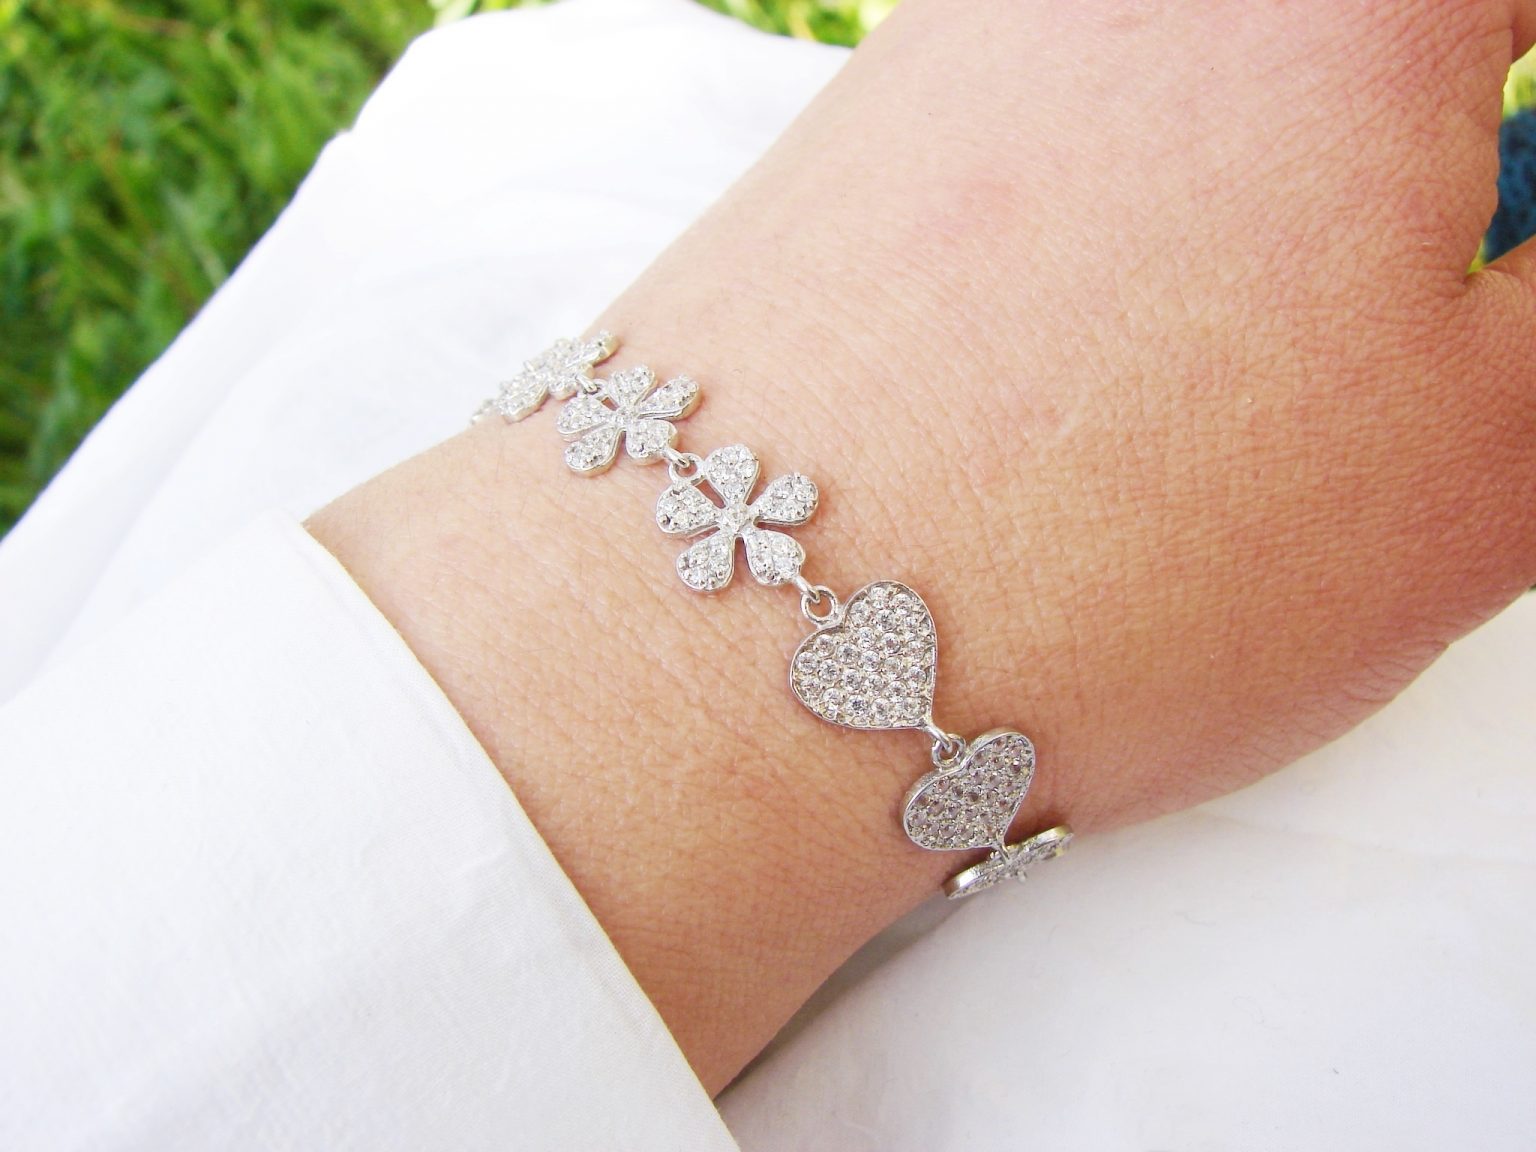 Bracelet Hearts & Flowers Sterling Silver 925 with Sparkling Zircons